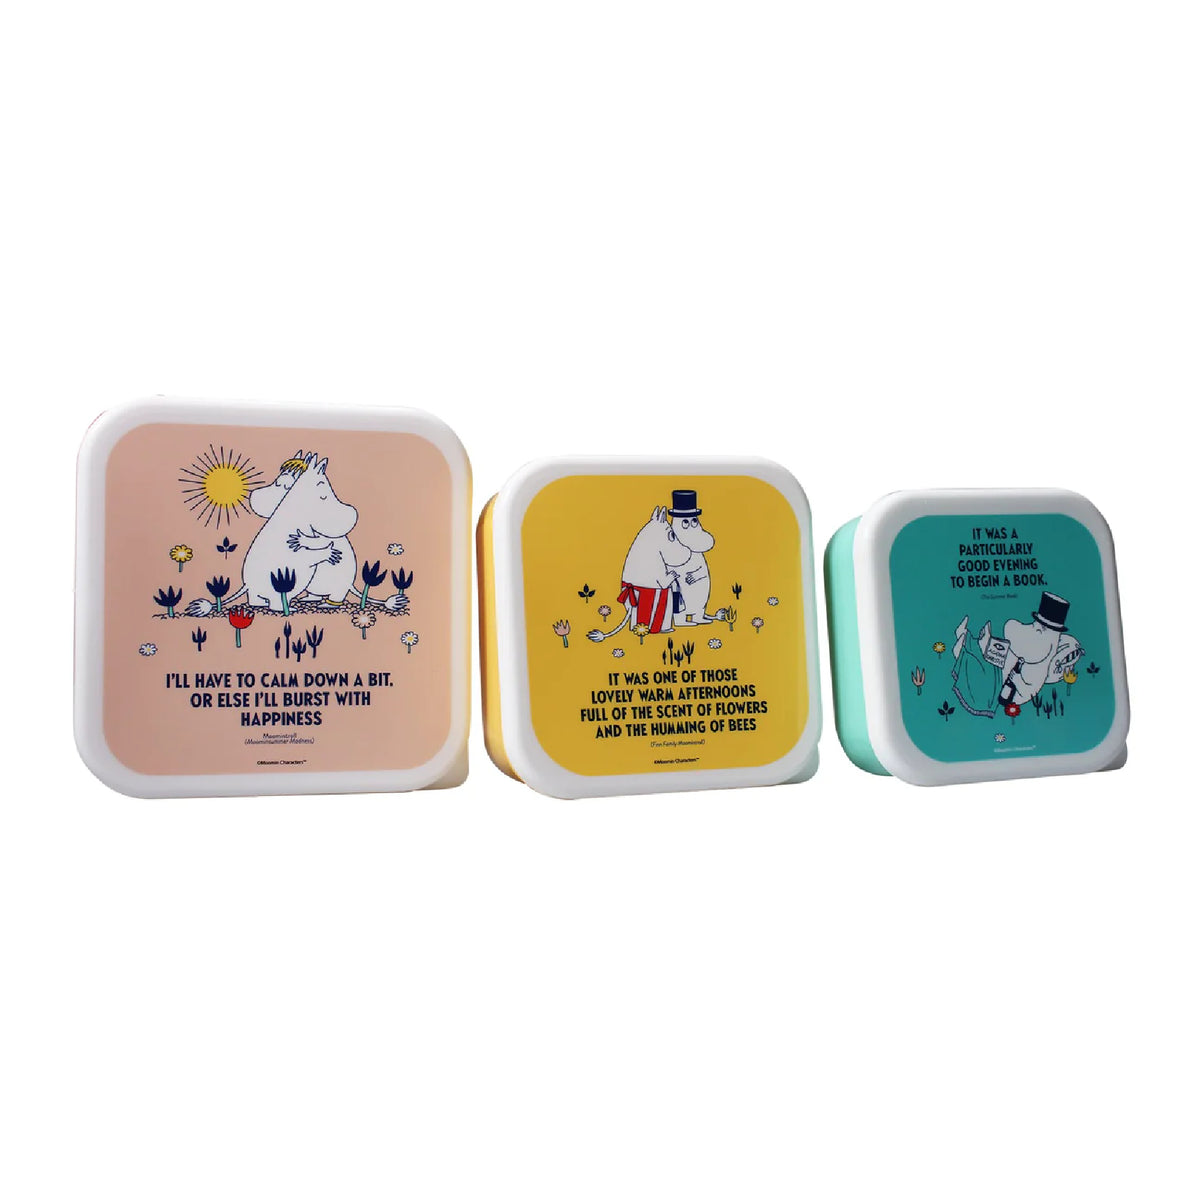 Moomin Snack Boxes Set of 3